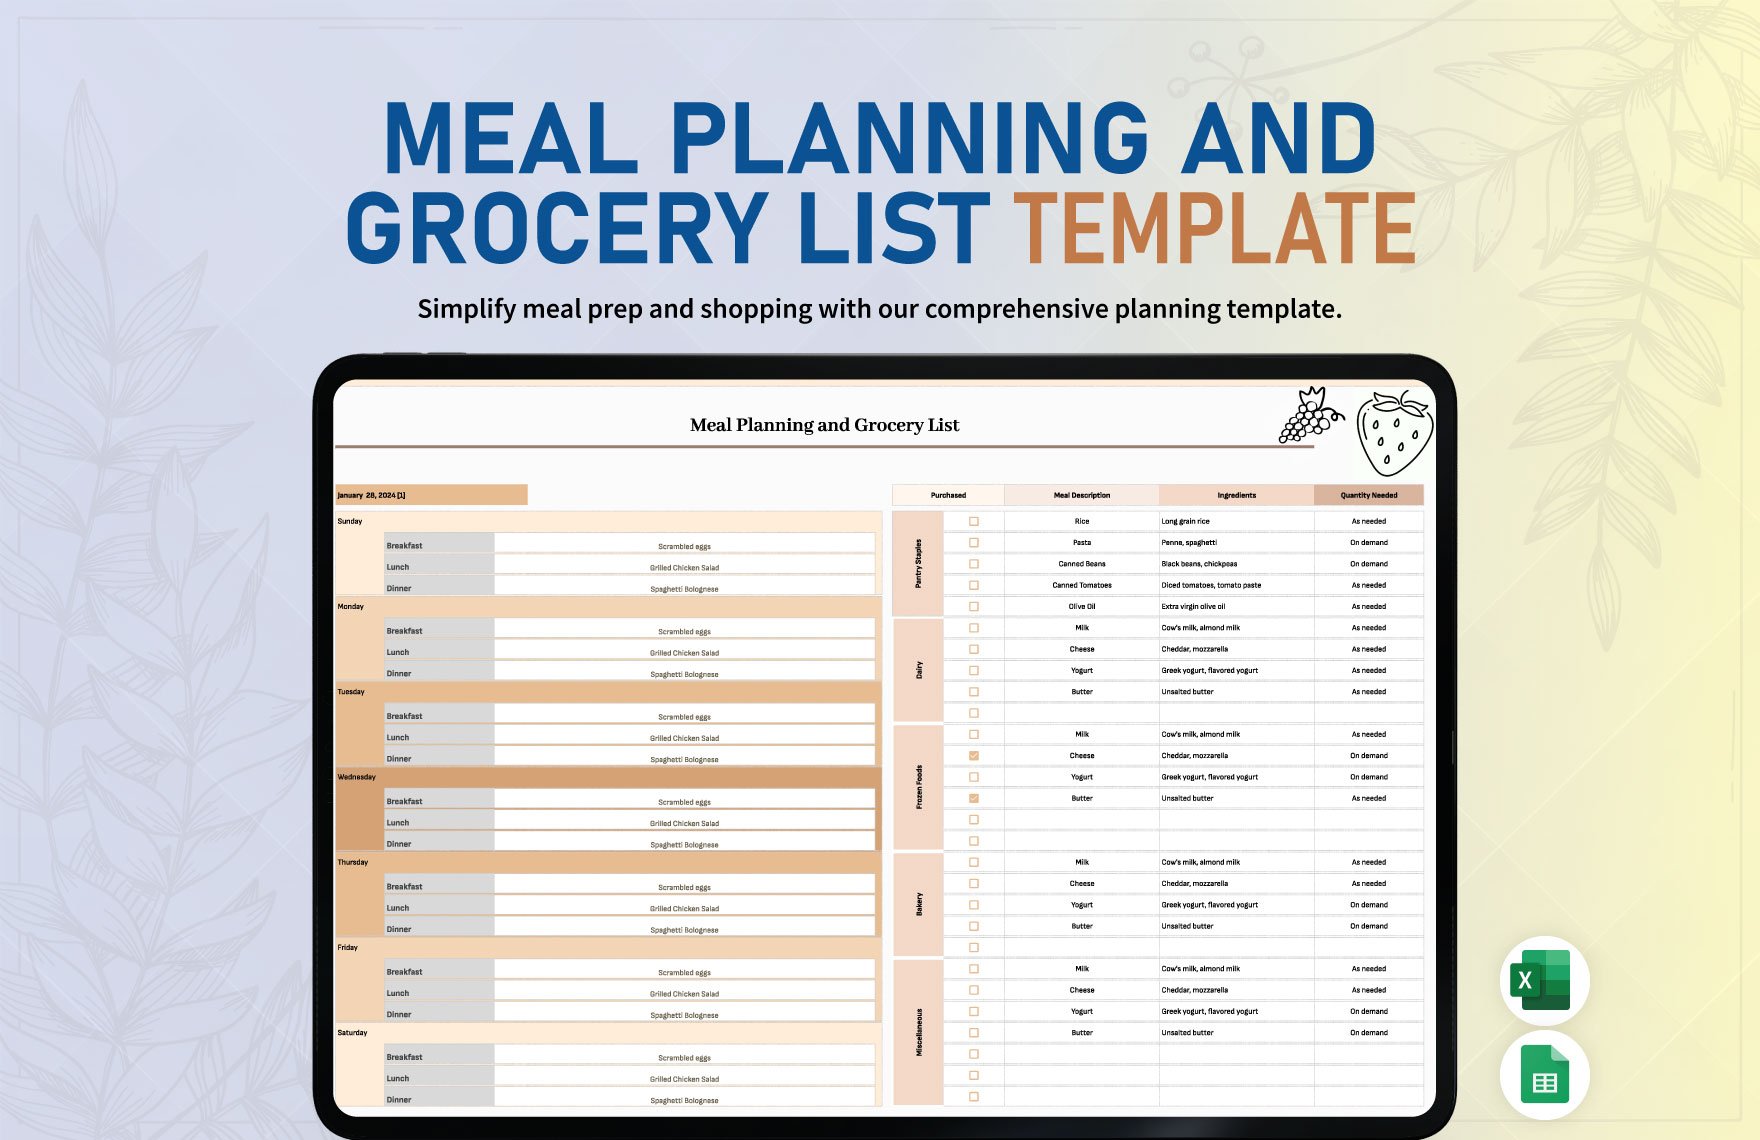 Meal Planning and Grocery List Template